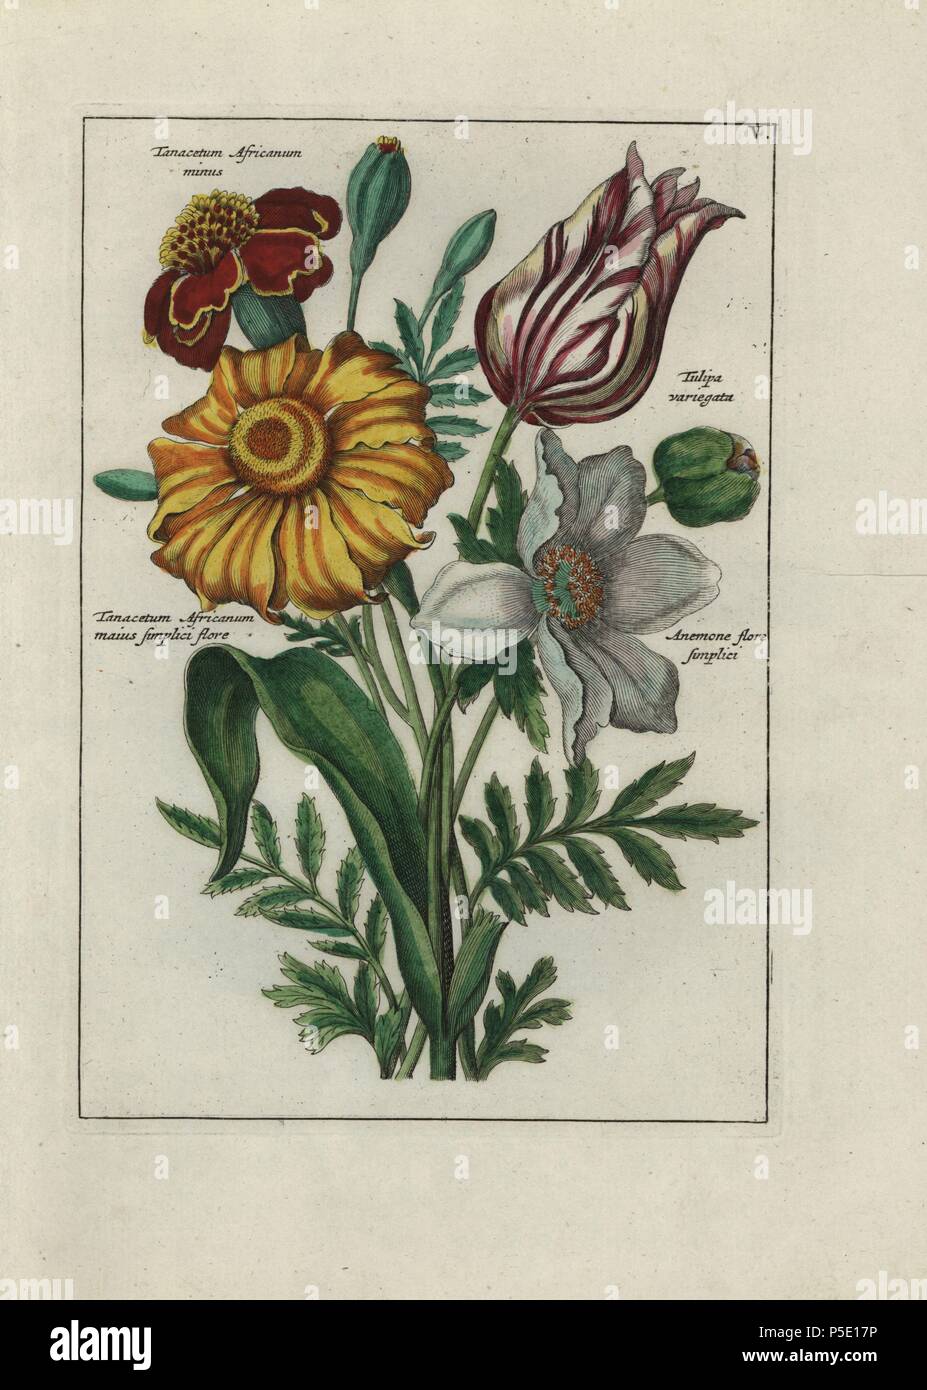 Bouquet of feverfew (Tanacetum species), tulip (Tulipa variegata) and anemone (Anemone flore simplici). Handcoloured copperplate botanical engraving from 'Nederlandsch Bloemwerk' (Dutch Flower Arrangements), Amsterdam, J.B. Elwe, 1794. Illustration copied from a work by one of the outstanding French flower painters of the 17th century, Nicolas Robert (1614-1685), entitled 'Variae ac multiformes florum species.. Diverses fleurs,' Paris, 1660. Stock Photo